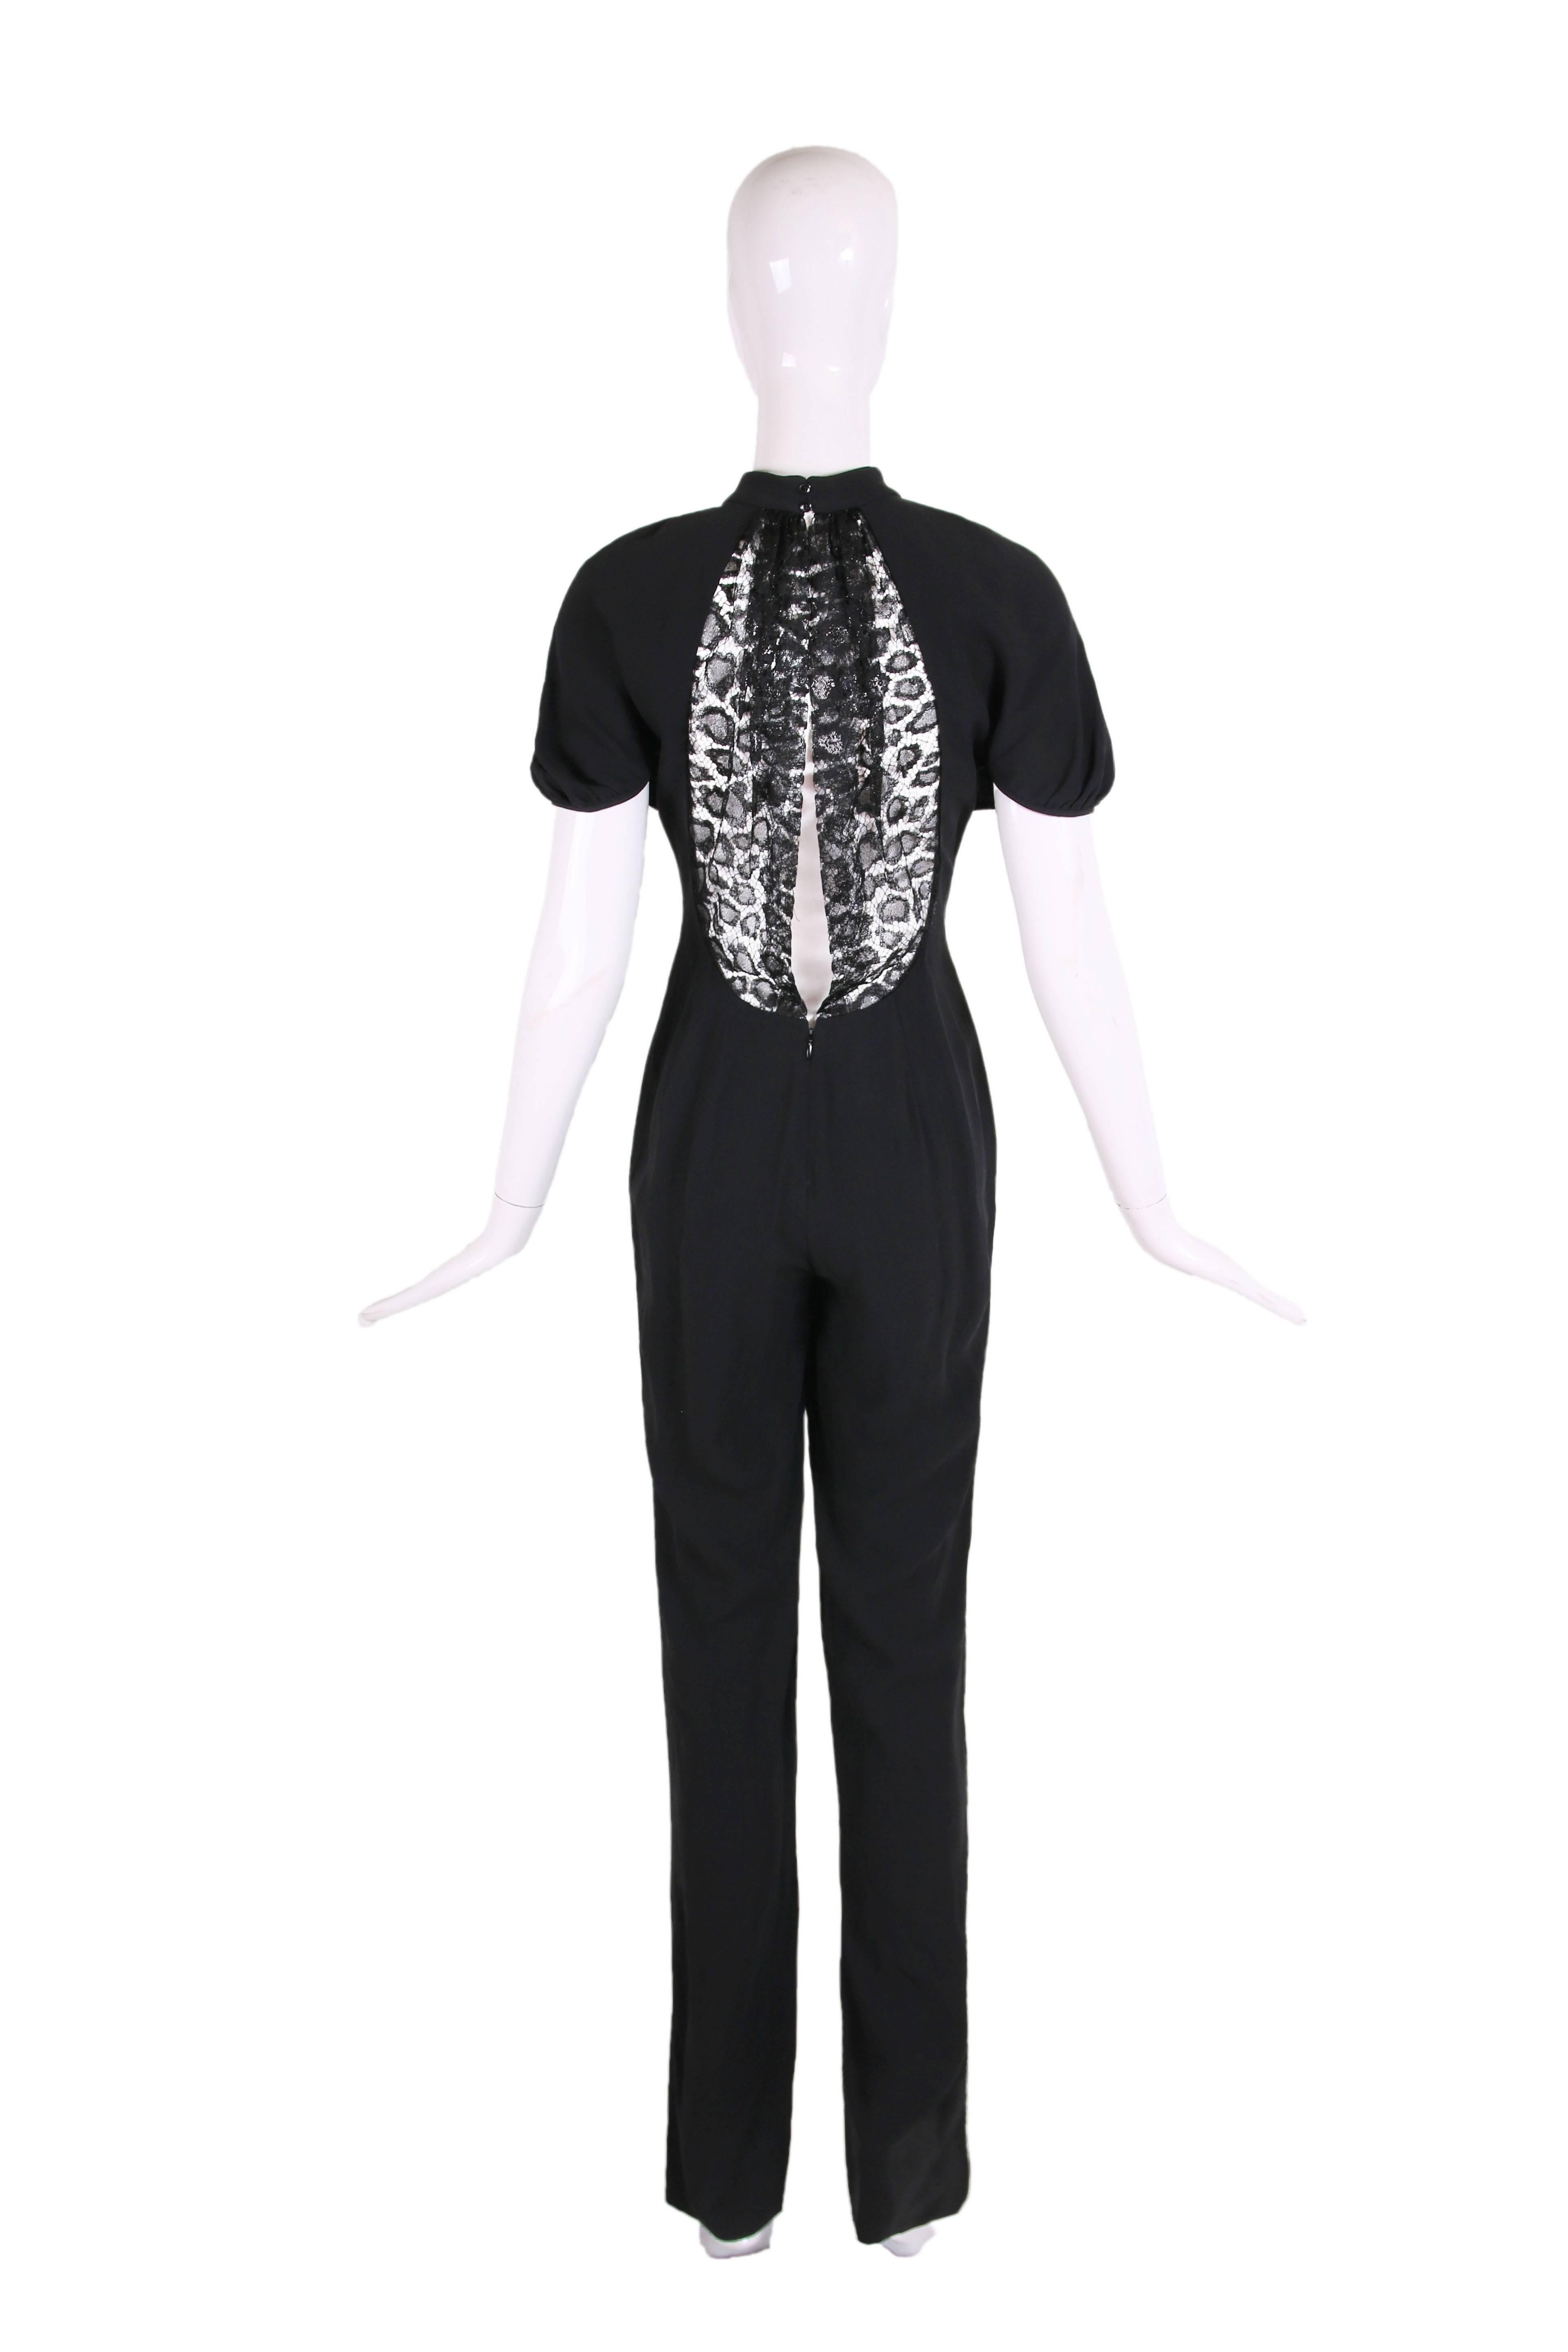 2012 Yves Saint Laurent black crepe jumpsuit w/shortsleeves and lace illusion panel at back. IN excellent condition - size 38.